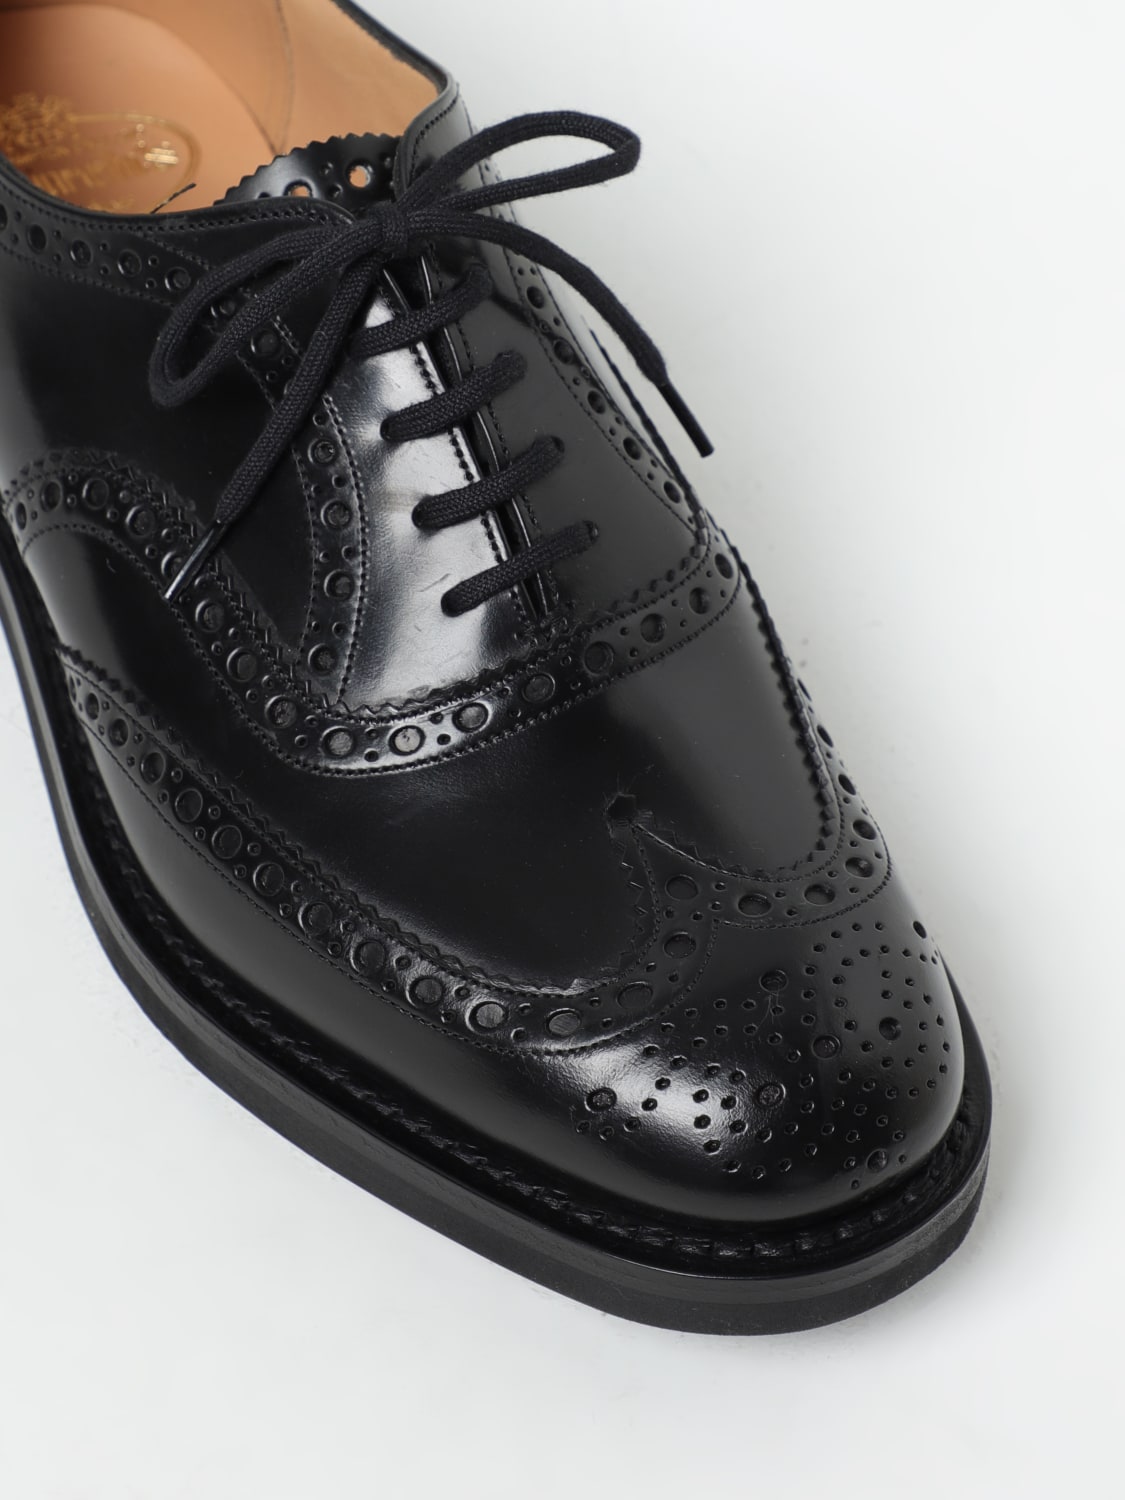 CHURCH'S: Burwood Oxford in brushed leather - Black | Church's brogue shoes  EEC3039XV online at GIGLIO.COM